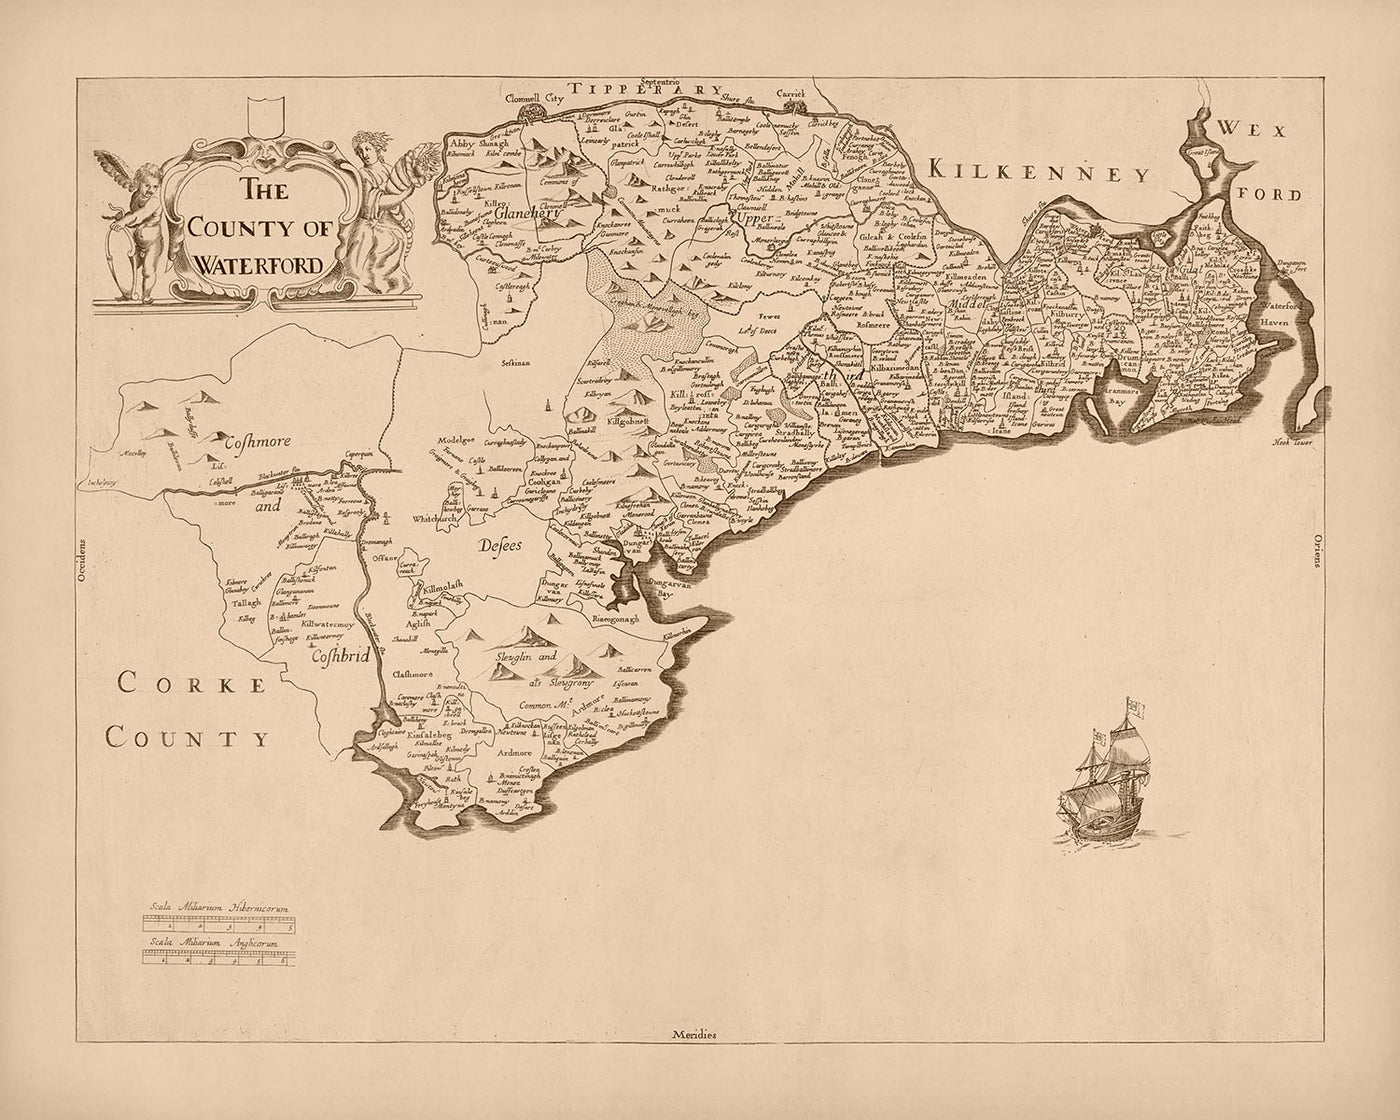 Old Map of County Waterford by Petty, 1685: Waterford, Lismore, Tallow, Youghal, Cappoquin